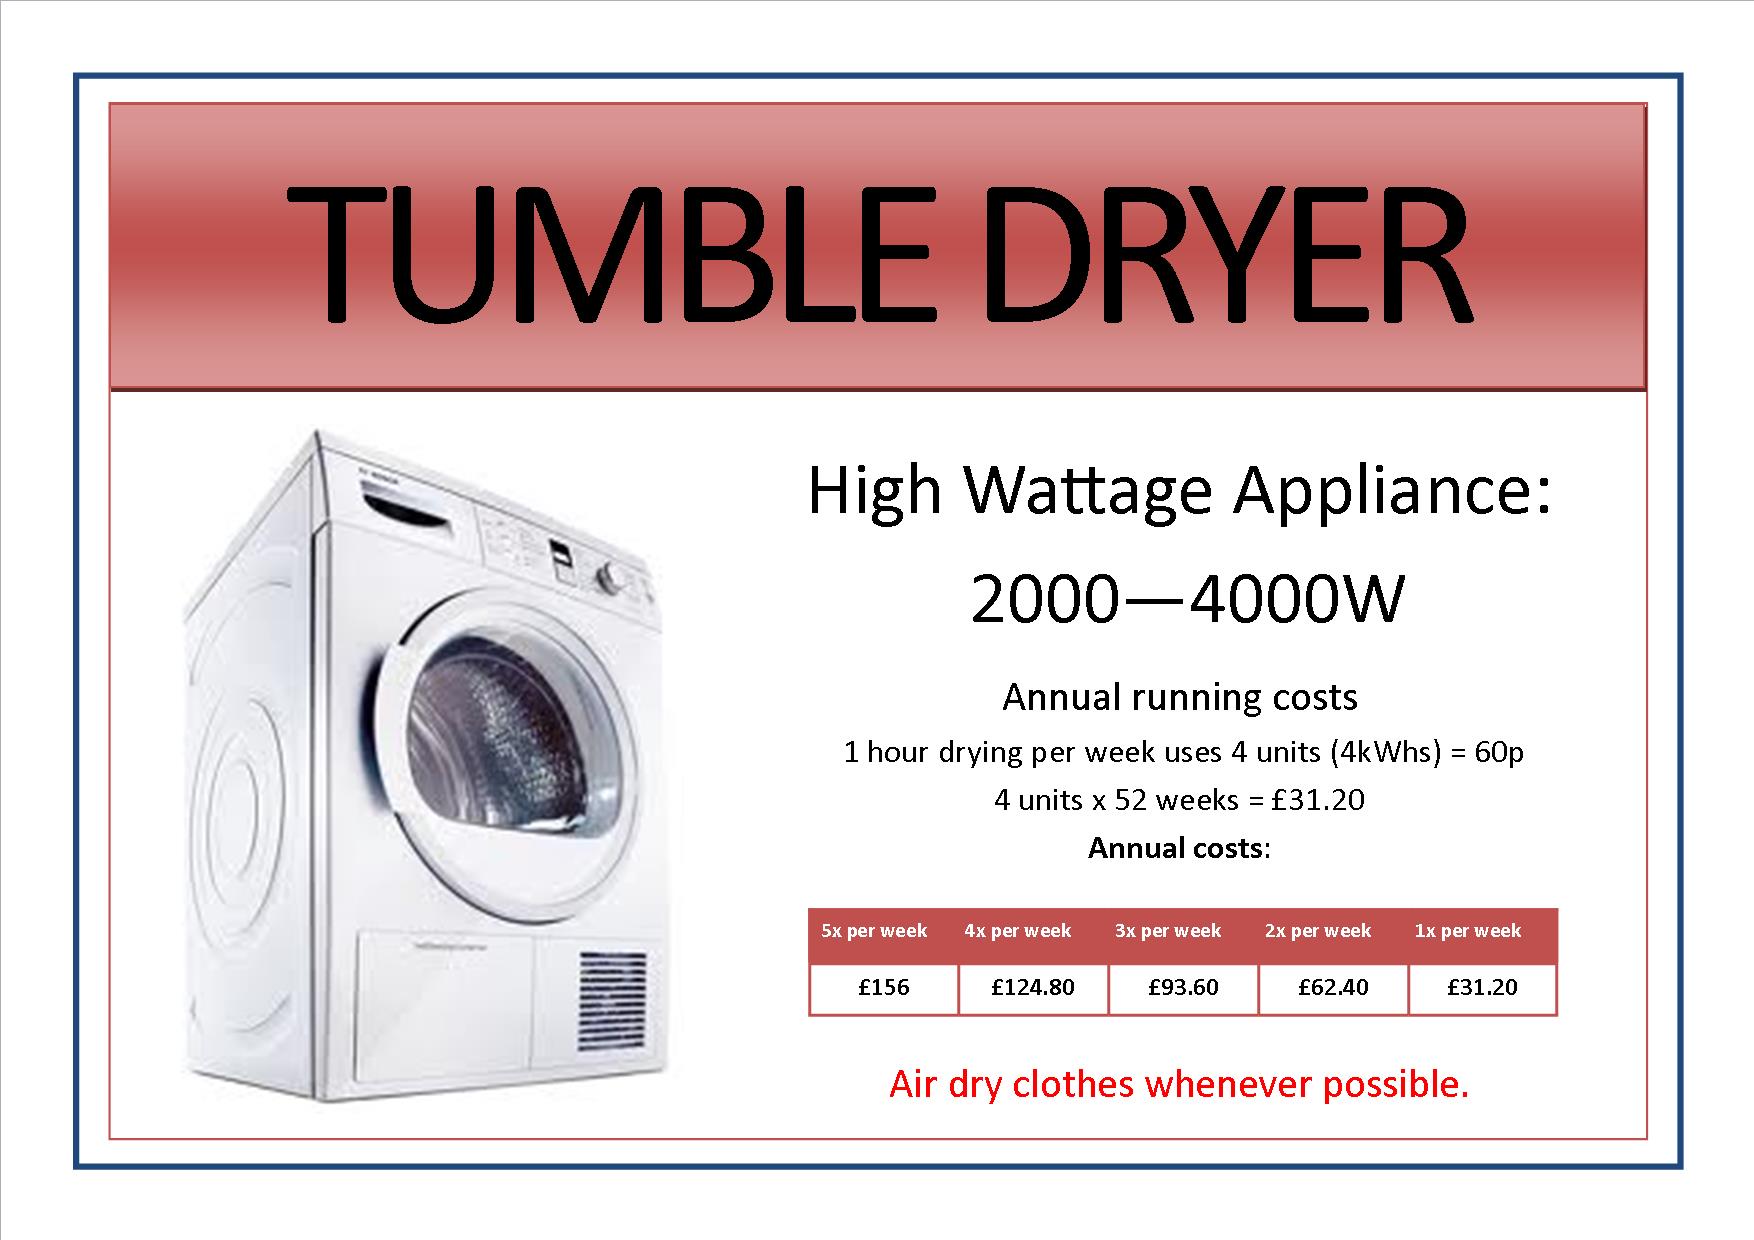 Appliance signs edit4 - tumble dryer